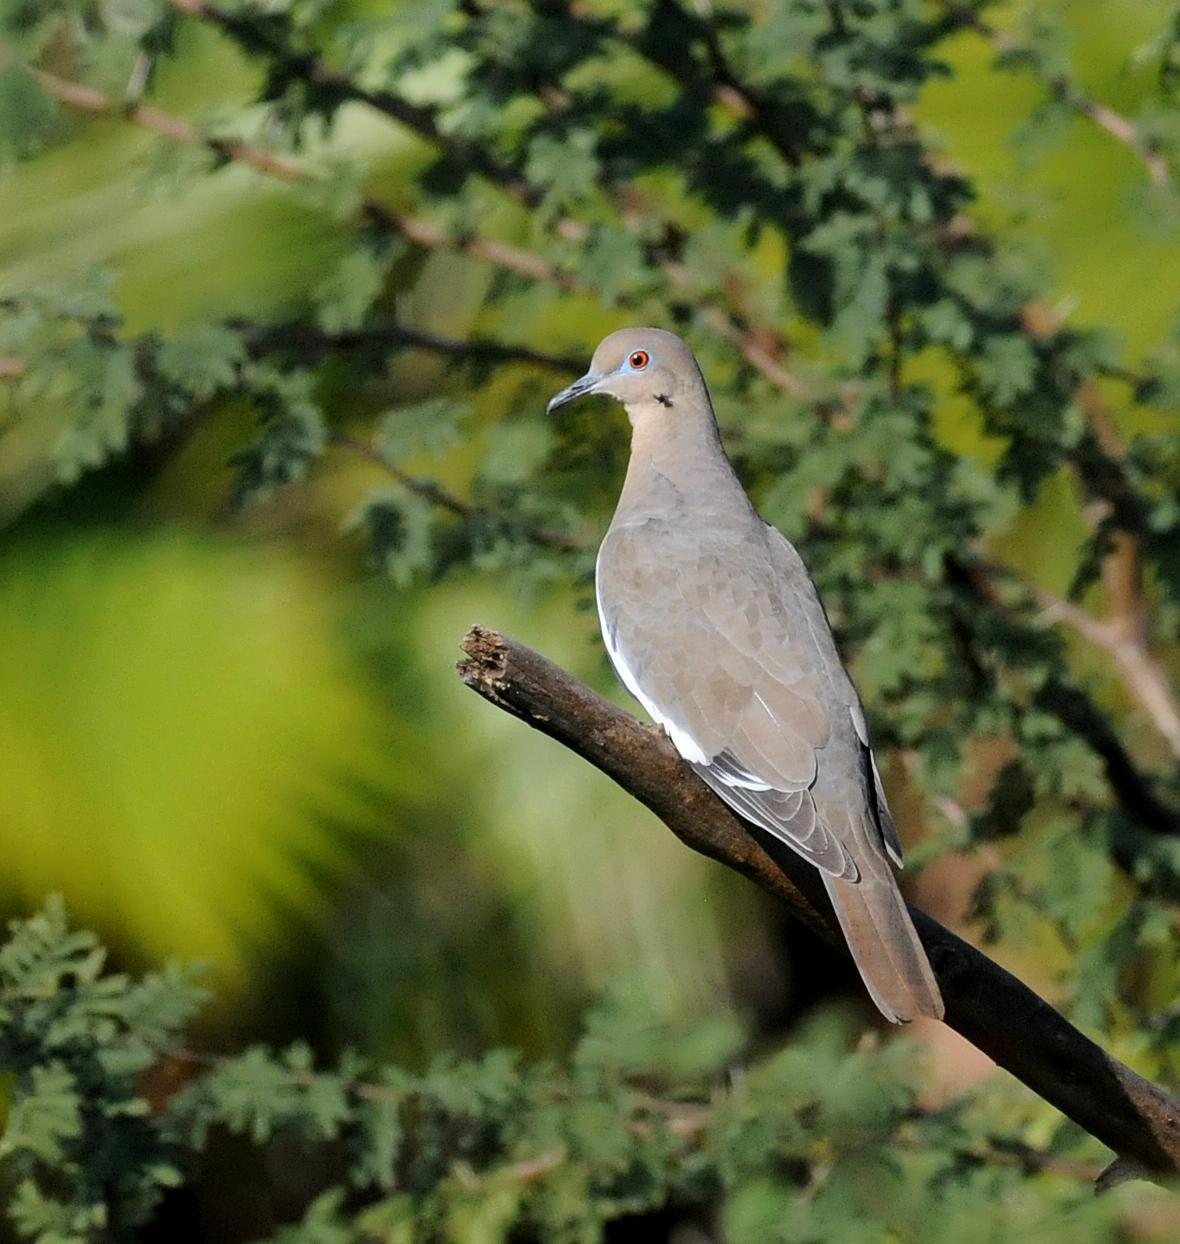 White-winged Dove Photo by Steven Mlodinow